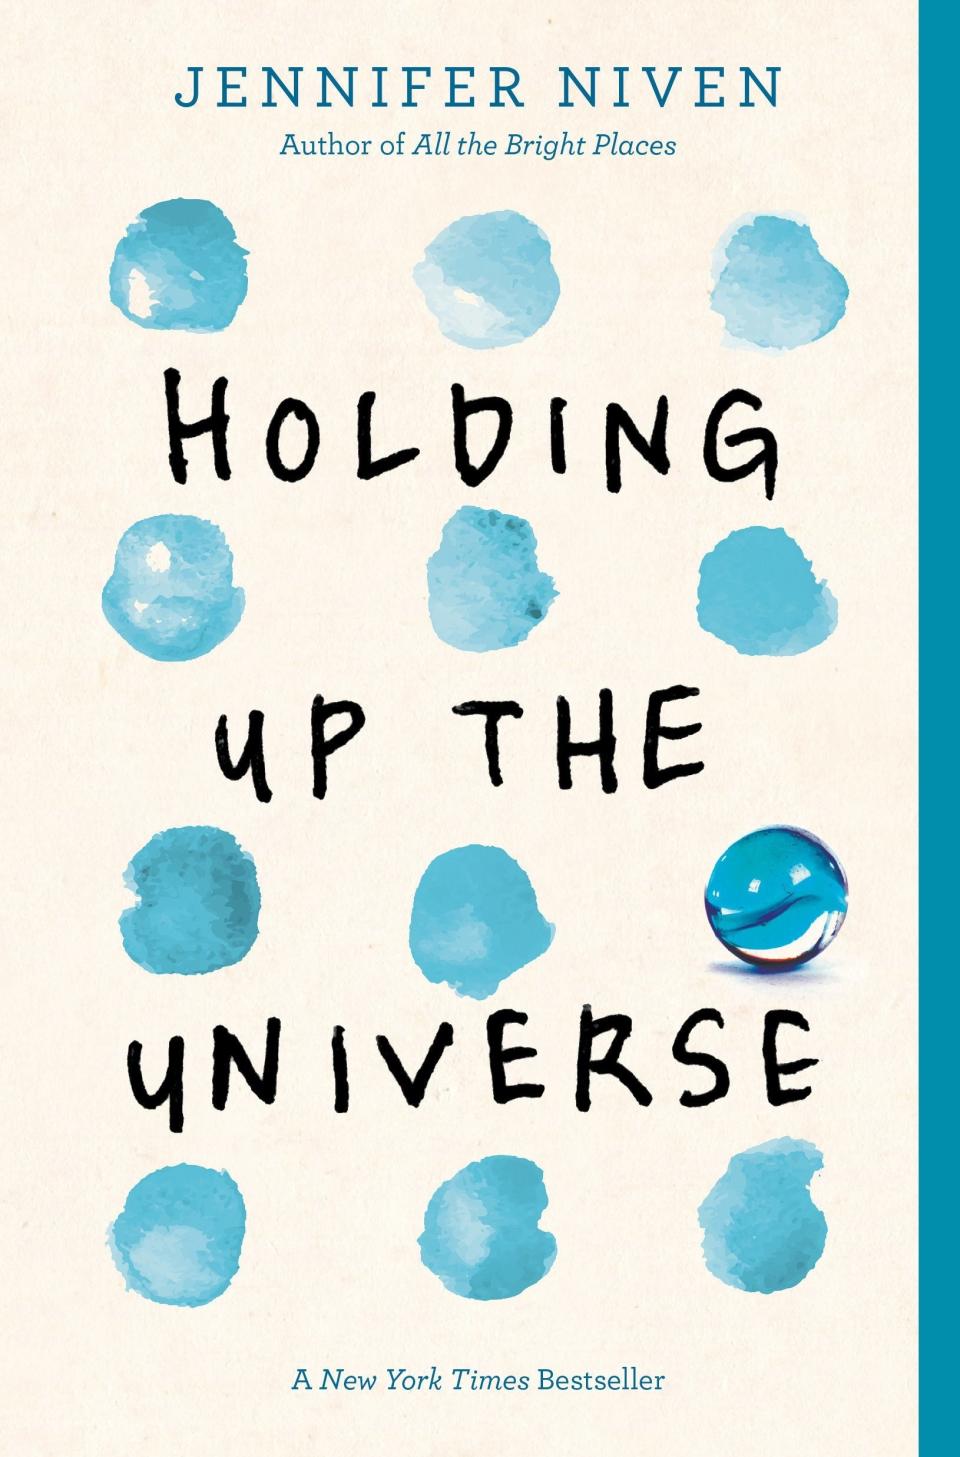 Cover shows lines of blue watercolor dots with title text in the center